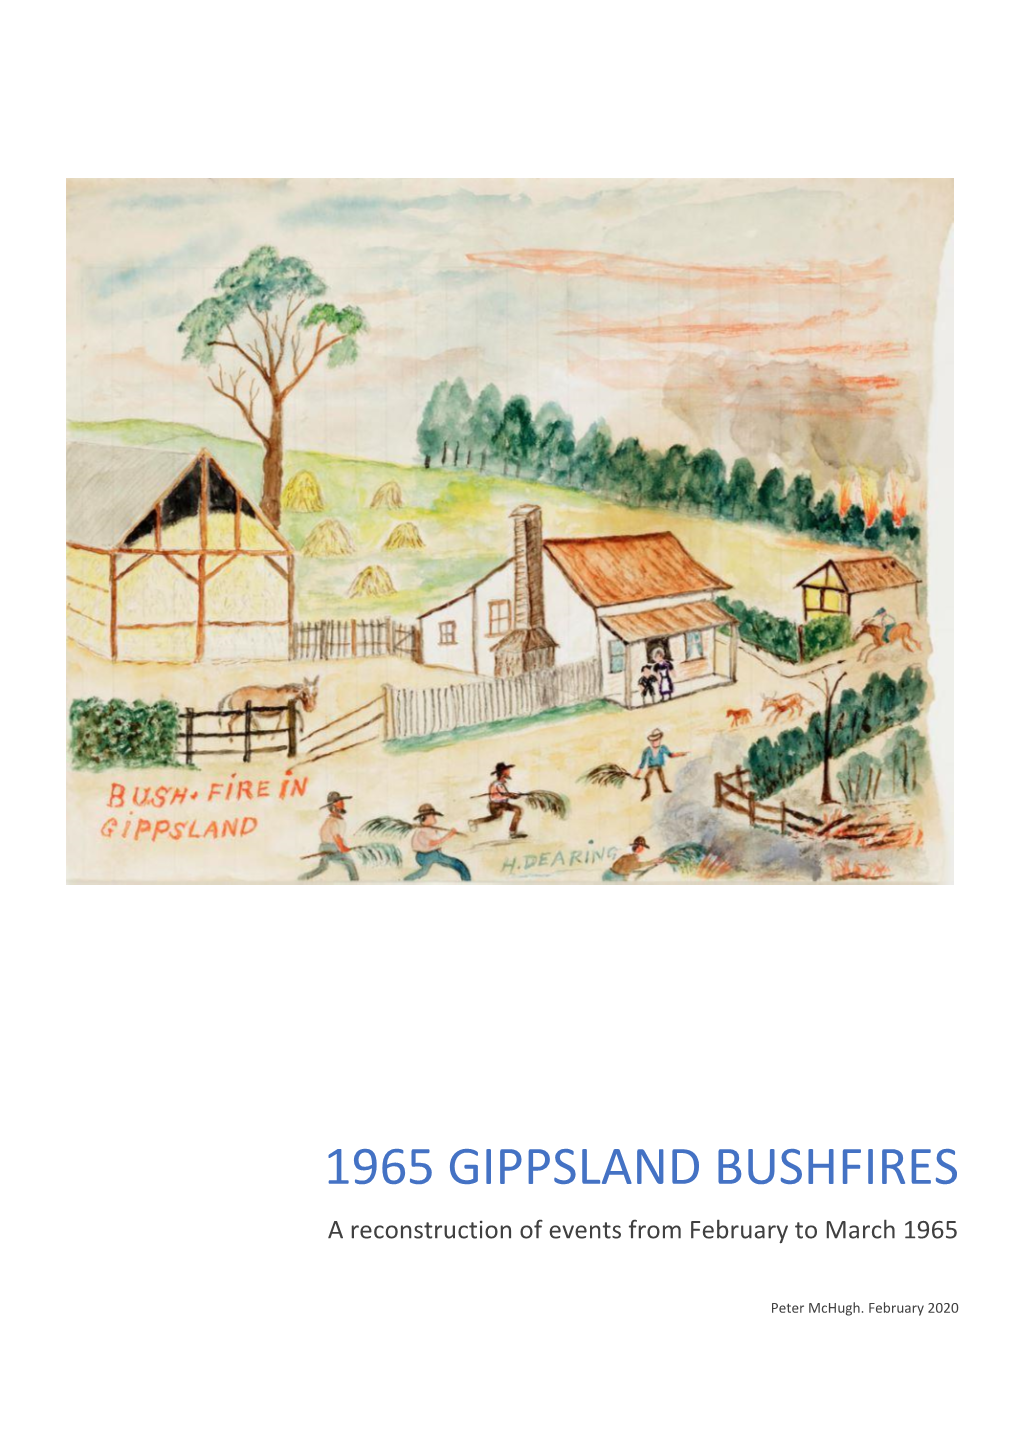 1965 GIPPSLAND BUSHFIRES a Reconstruction of Events from February to March 1965